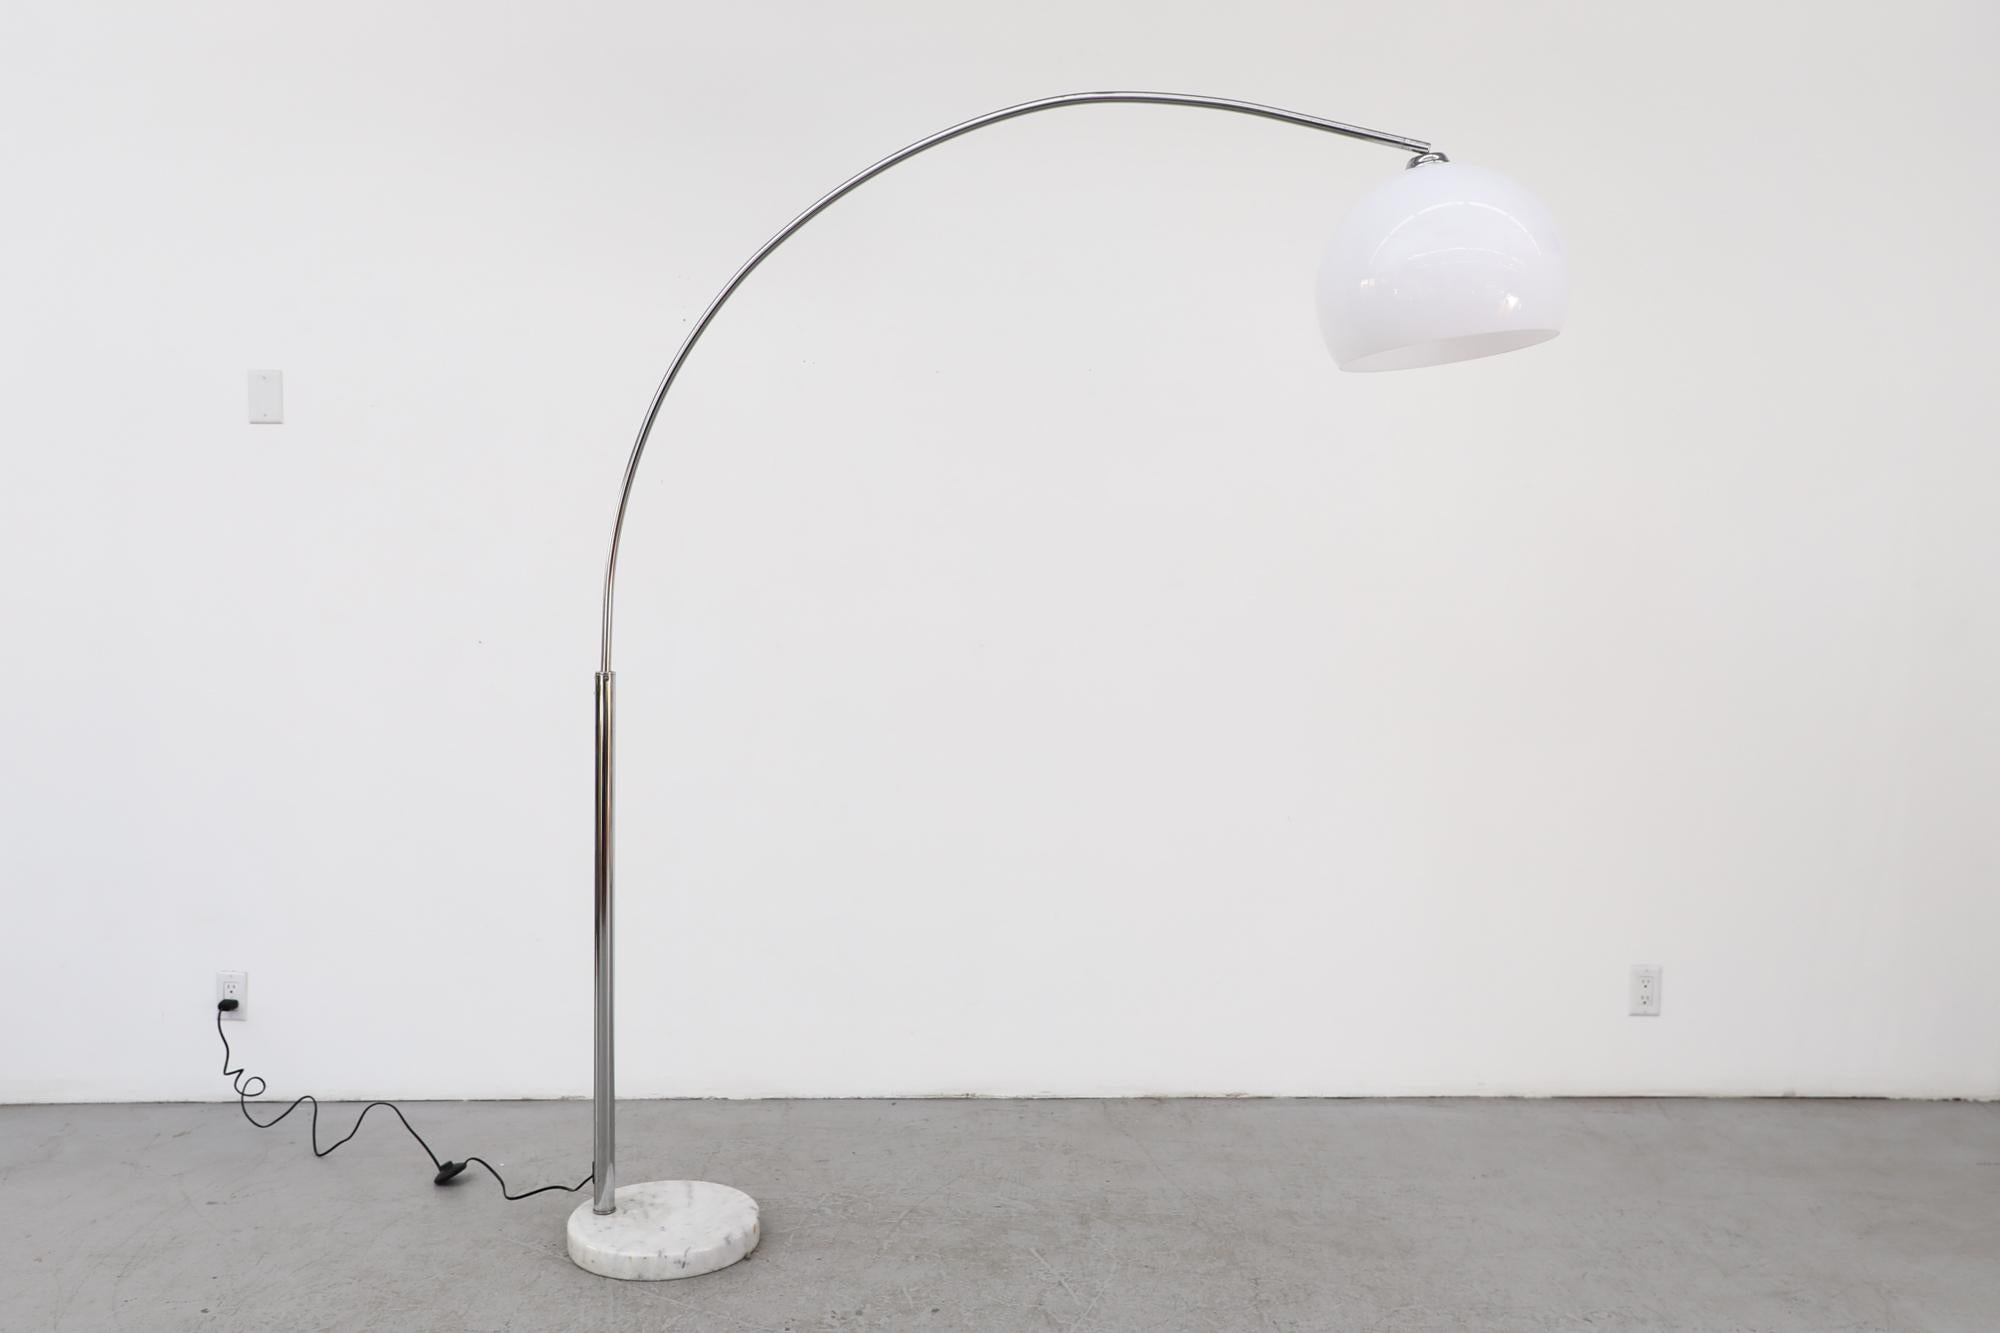 Mid-Century standing arc lamp with marble base, chrome stem and plexiglass dome shade. In original condition with visible wear consistent with its age and use. Other arc lamps are available and listed separately.